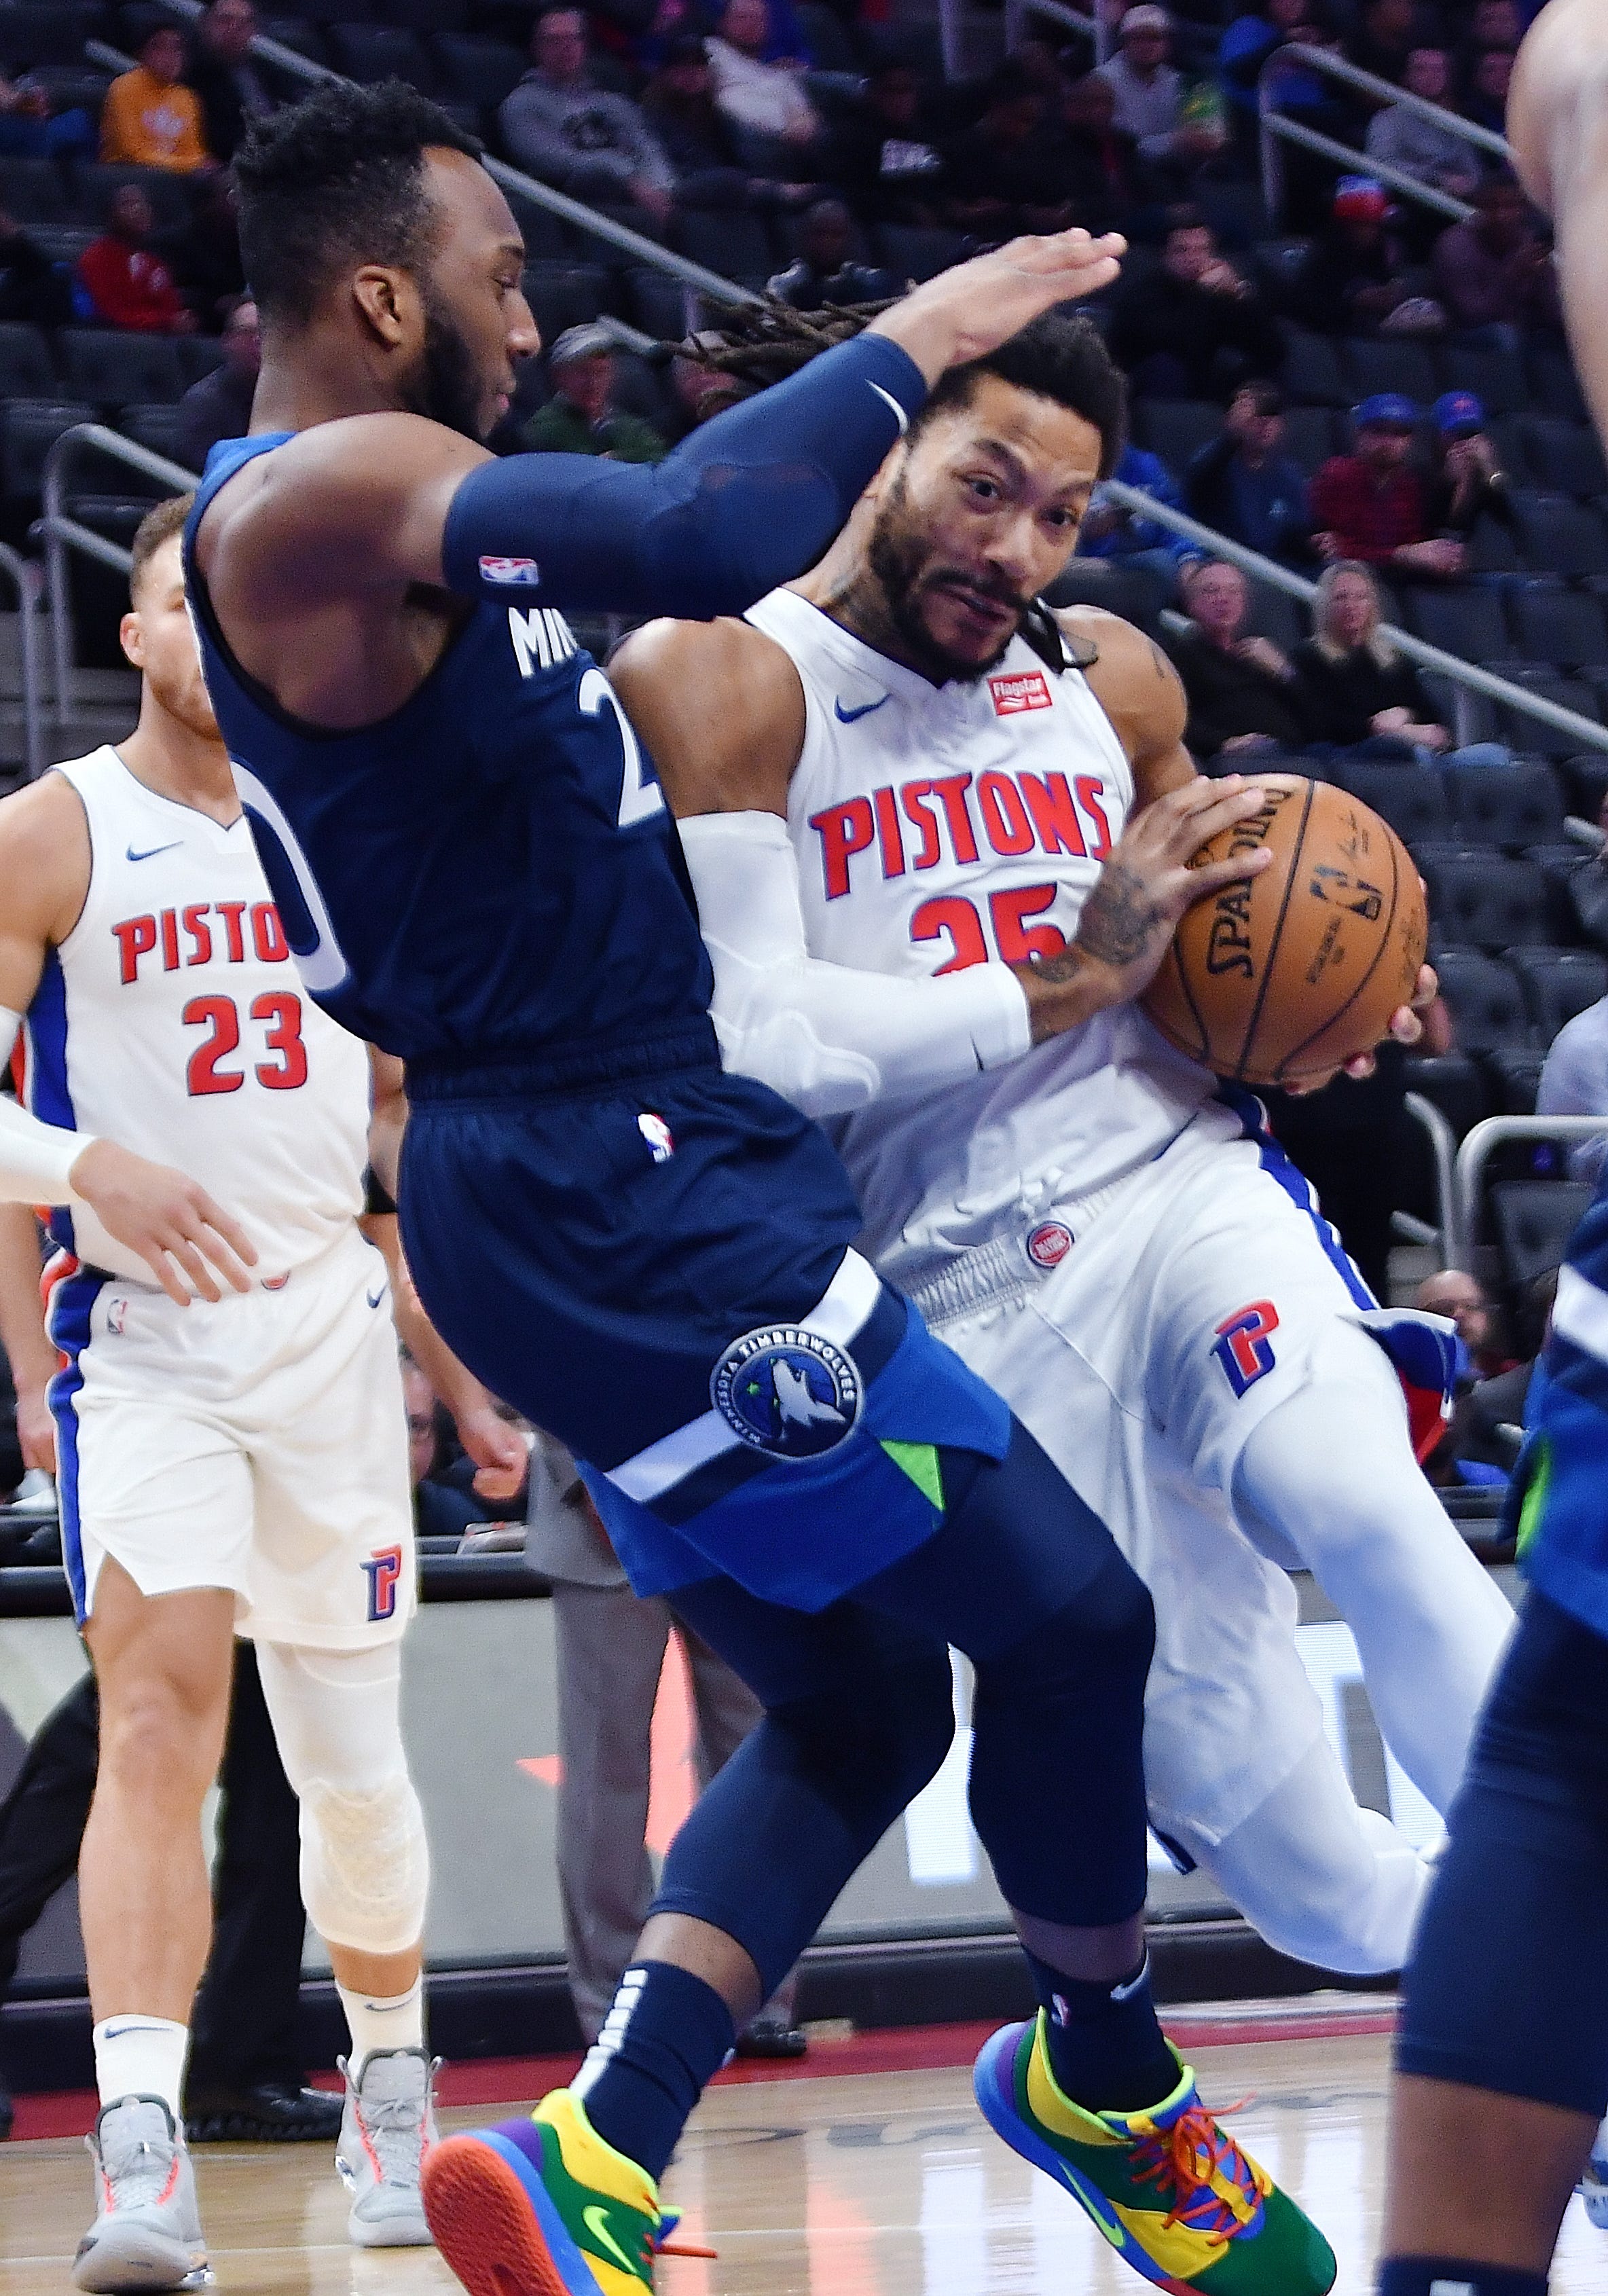 Pistons' Derrick Rose drives past Timberwolves' Josh Okogie in the first quarter. Rose had six points and five assists. The Timberwolves defeated the Pistons,120-114, Monday, November 11, 2019 at Little Caesars Arena in Detroit, Michigan.